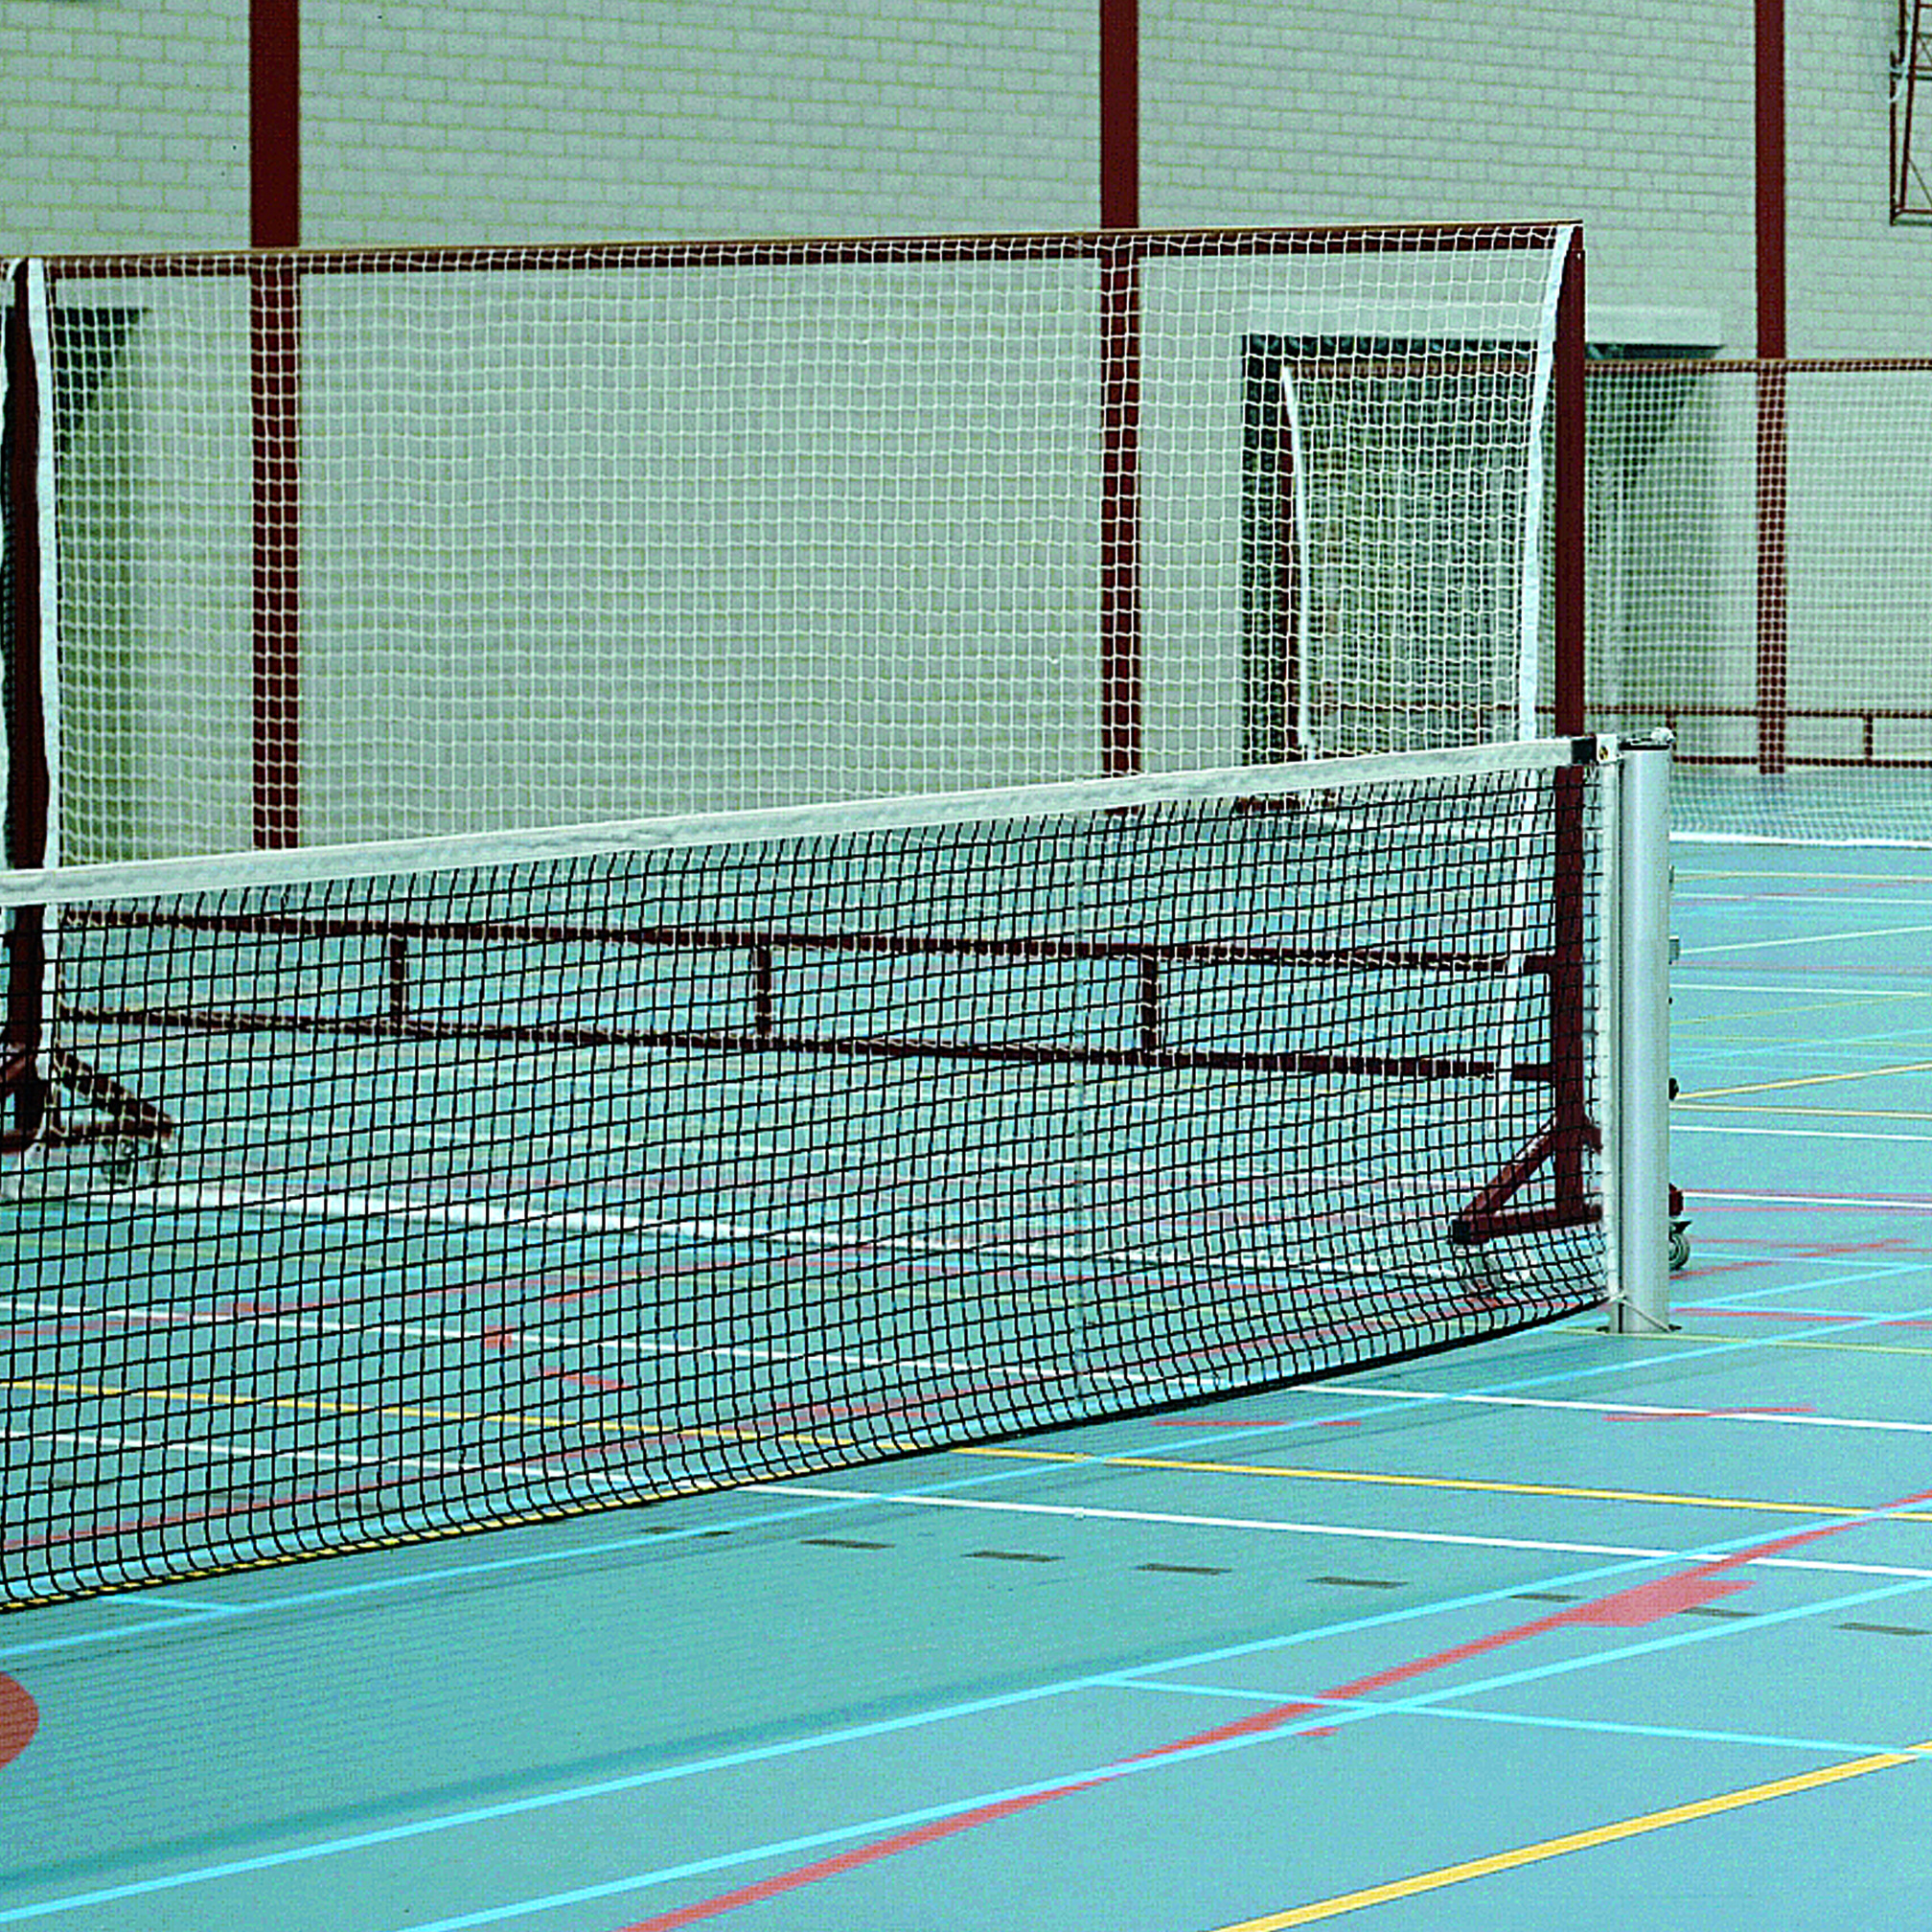 Tennis net, square meshed